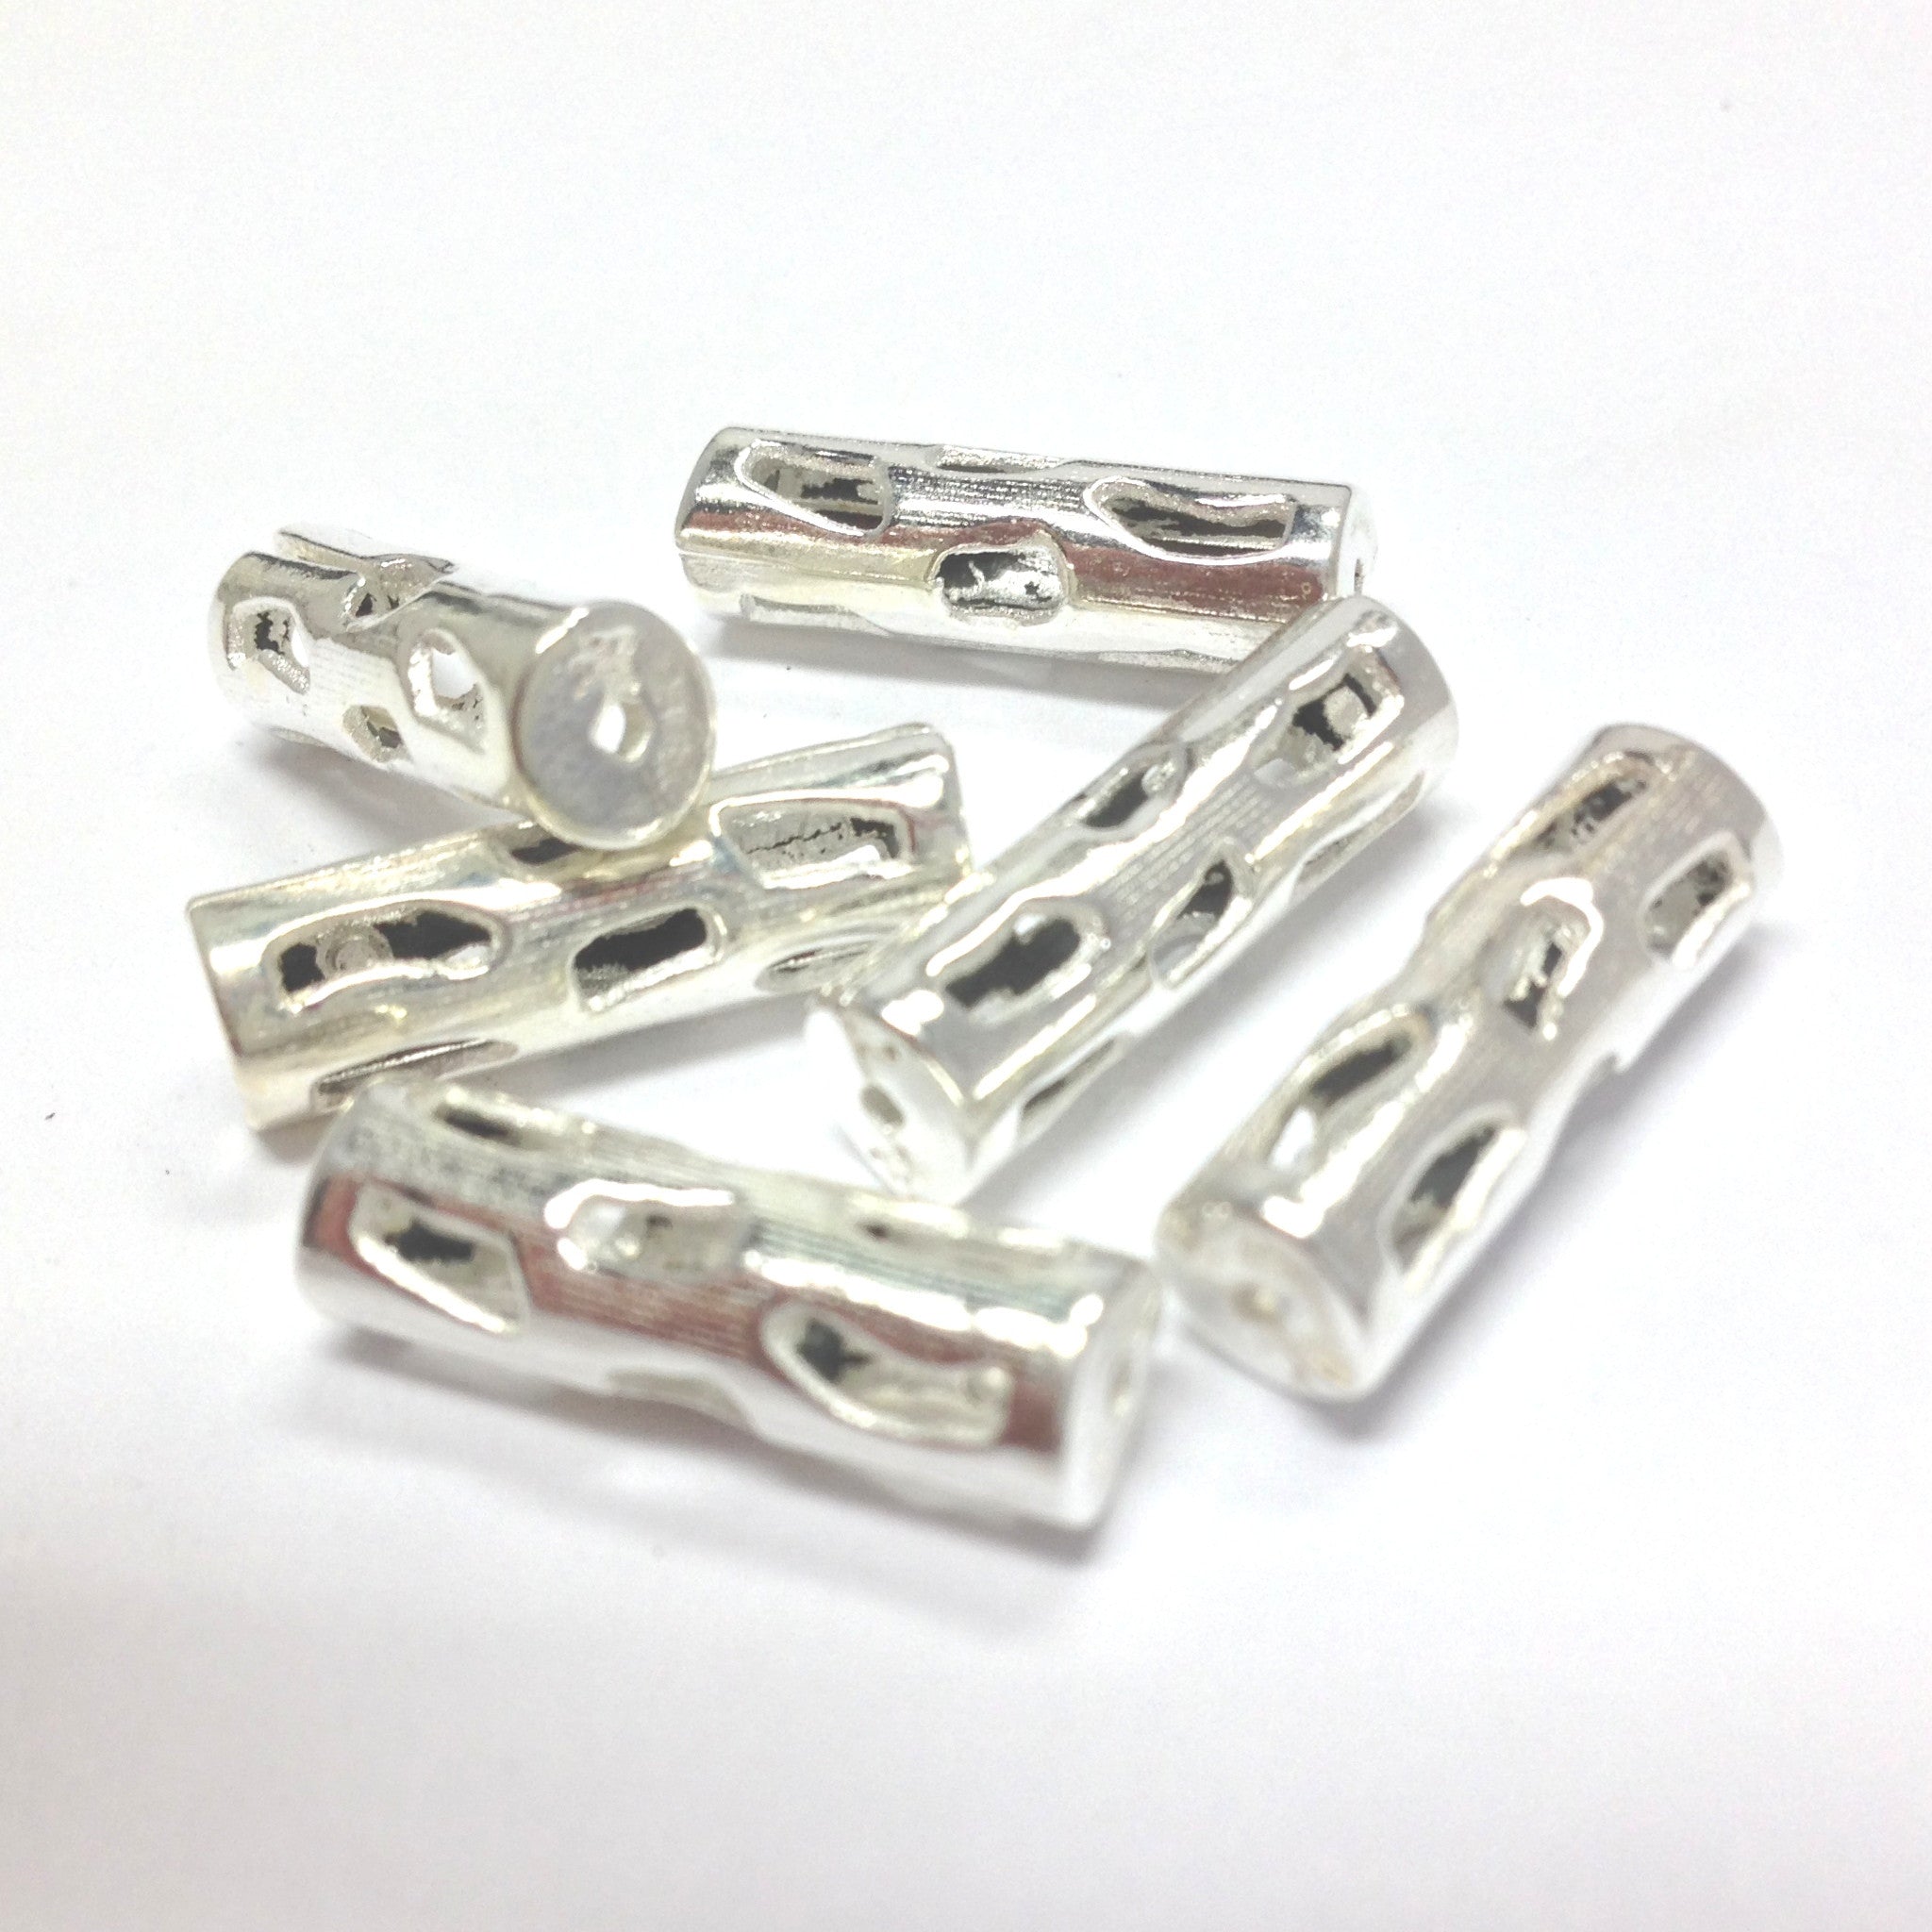 18X5MM Perforated Silver Tube Bead (72 pieces)